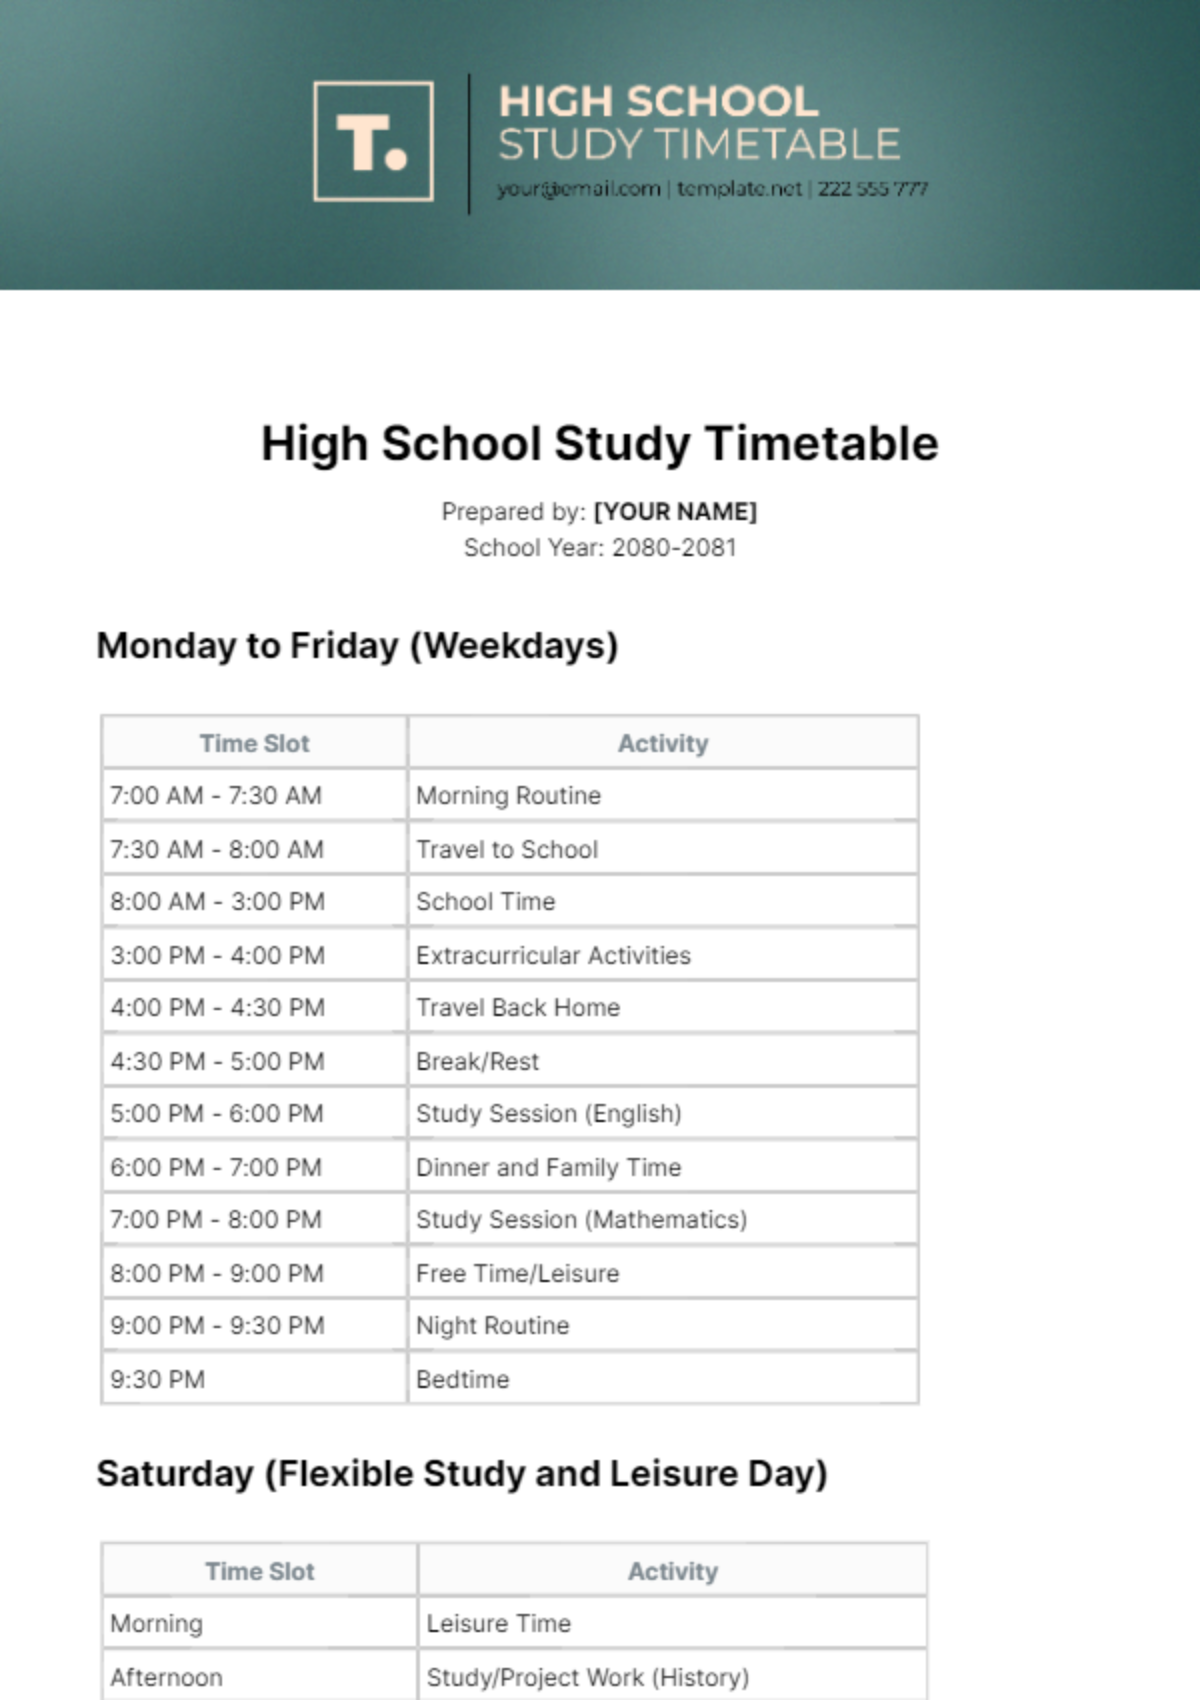 High School Study Timetable Template